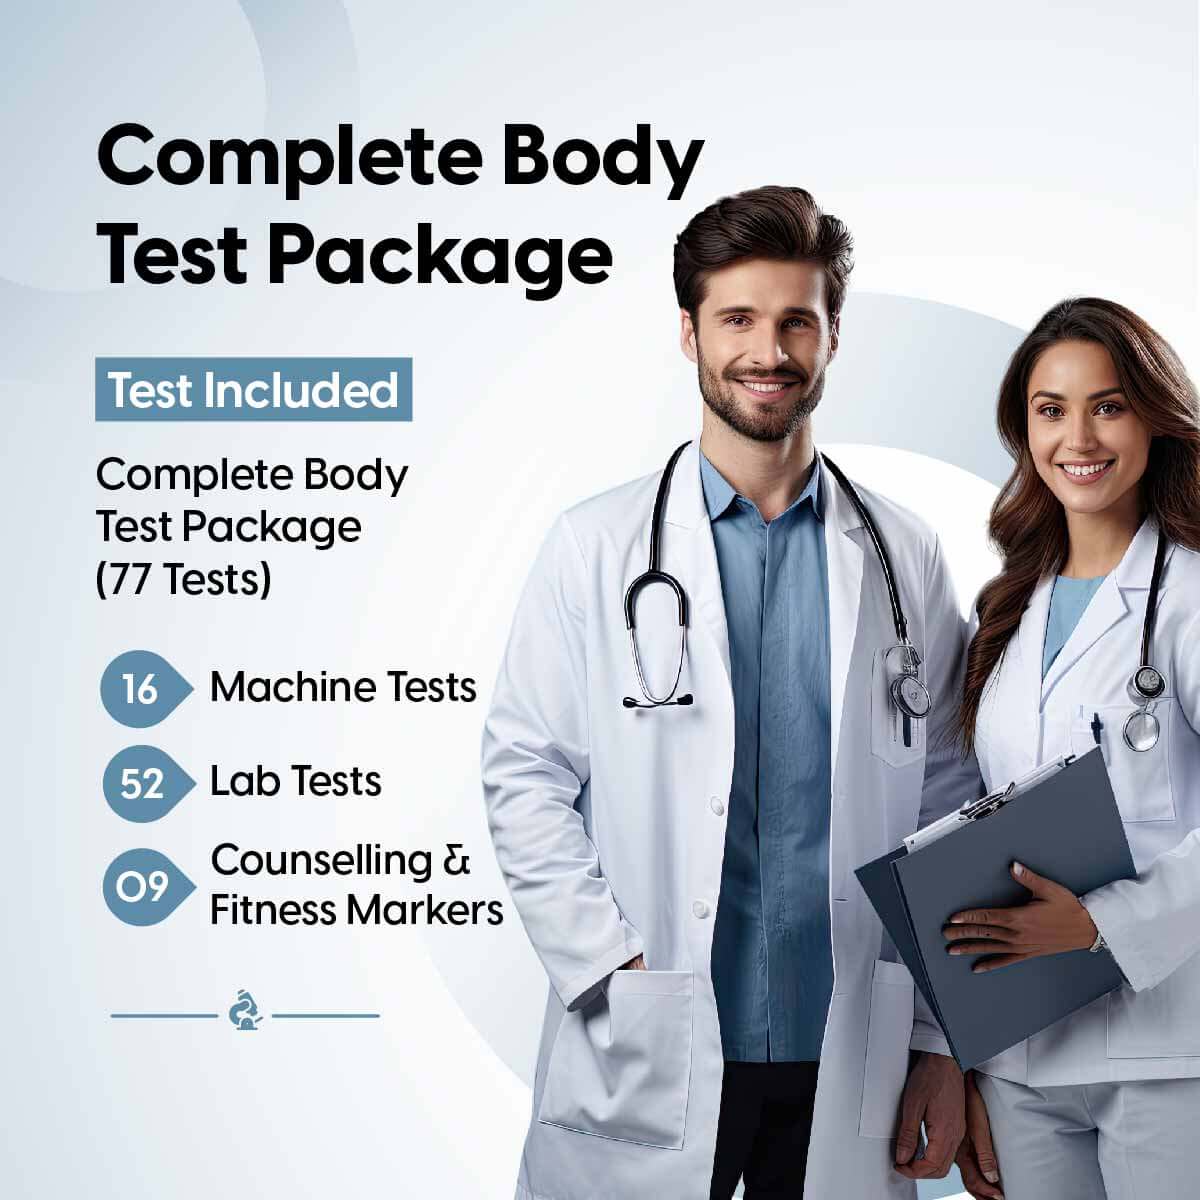 Complete Body Test Package